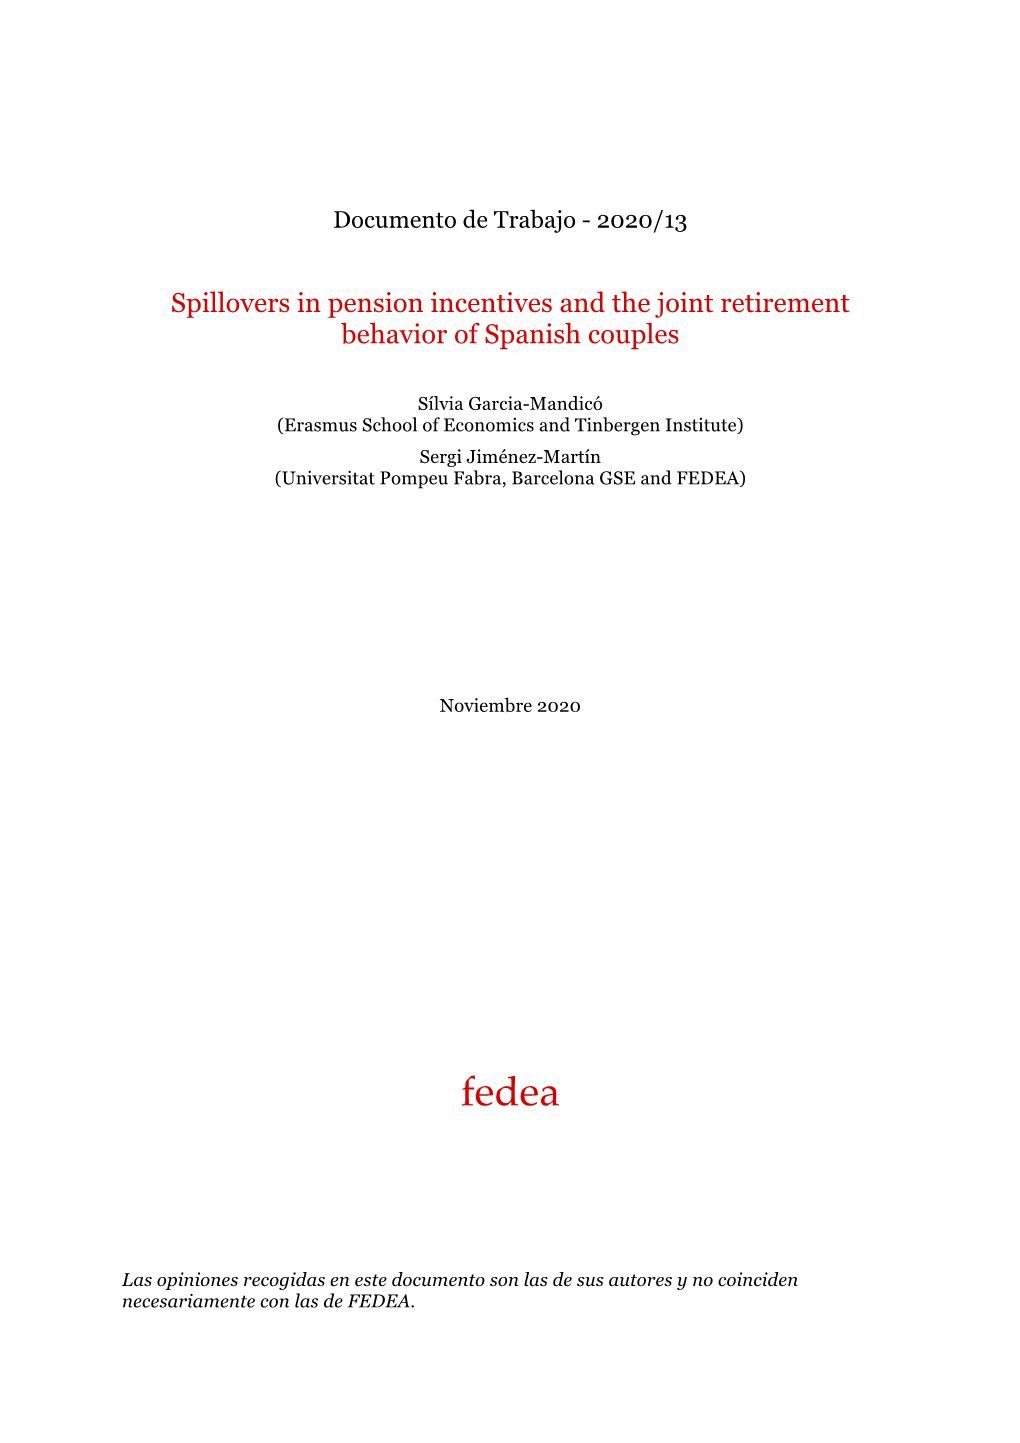 Spillovers in Pension Incentives and the Joint Retirement Behavior of Spanish Couples